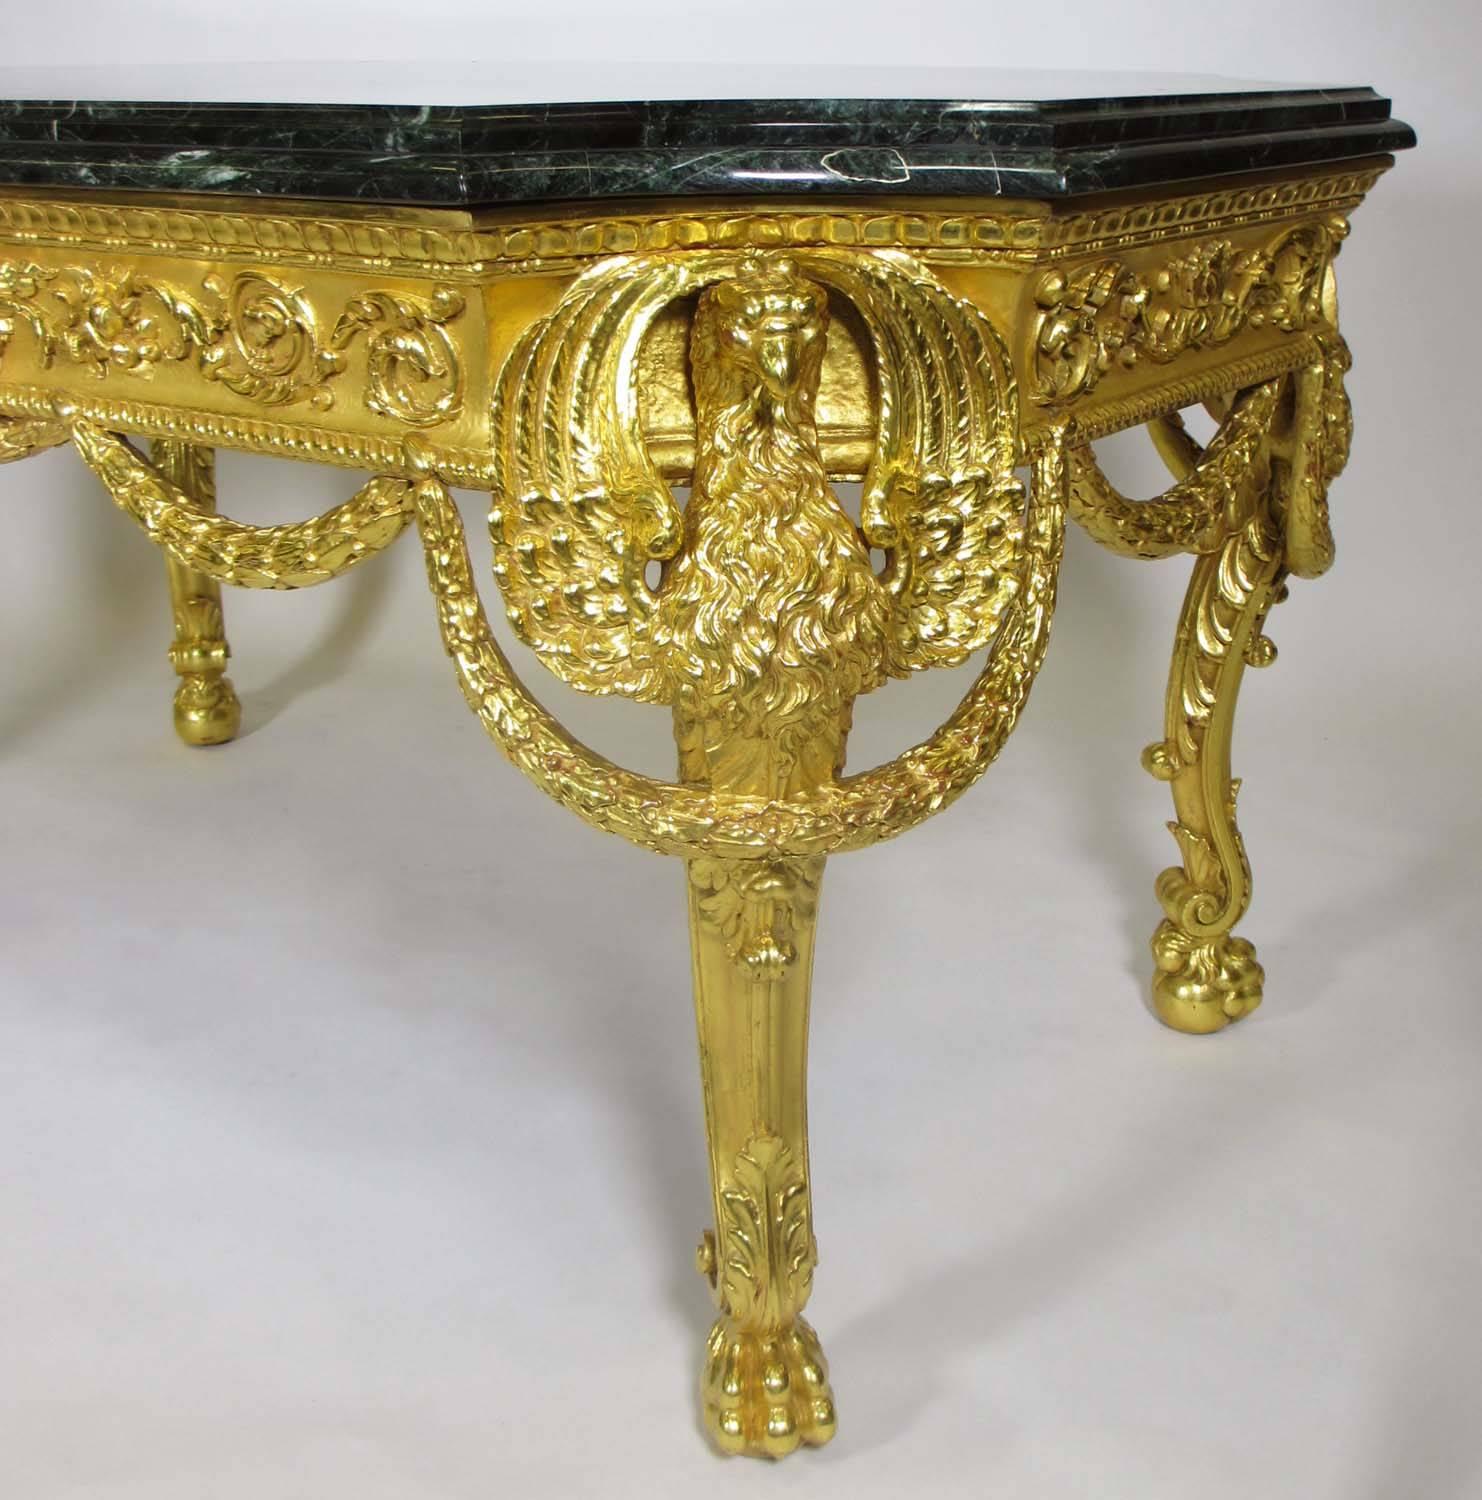 A Very Fine and Palatial French 19th Century Empire Style Giltwood Carved Figural Center Table with Figures of Winged Eagles and Wreaths, the center medallion with a figure of a bull and and raised on lion paws over a sphere, fitted with a veined